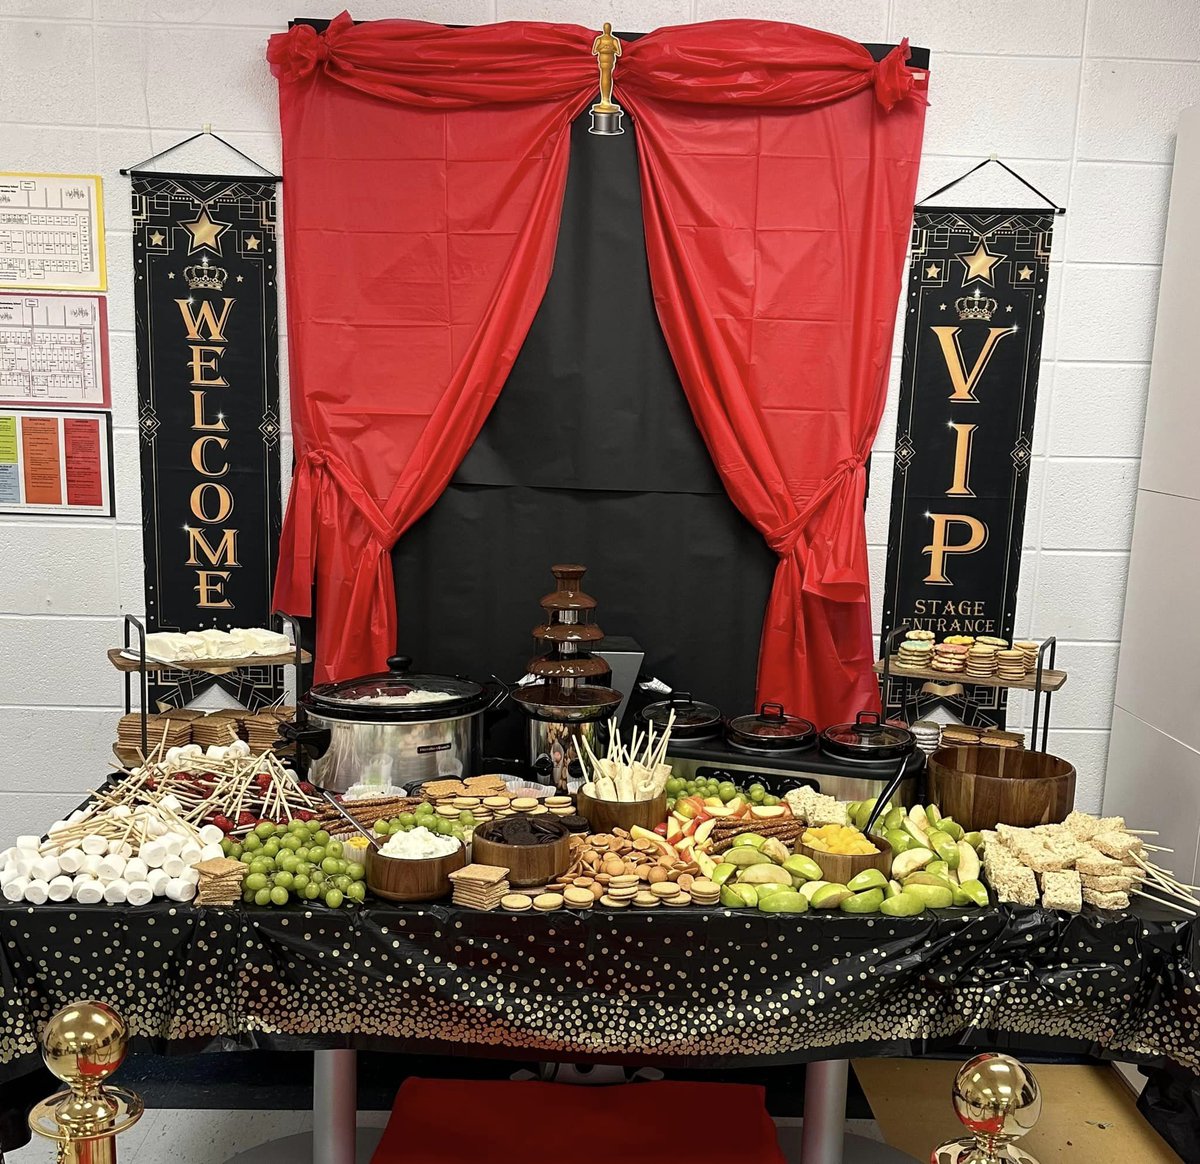 Wow! Elsie Collier PTO knows how to treat its teachers right during Teacher Appreciation Week! Fondue, doughnuts, and delightful treats - what a sweet surprise to honor our amazing educators! Thank you for your thoughtfulness and appreciation! #LearningLeading #AimForExcellence